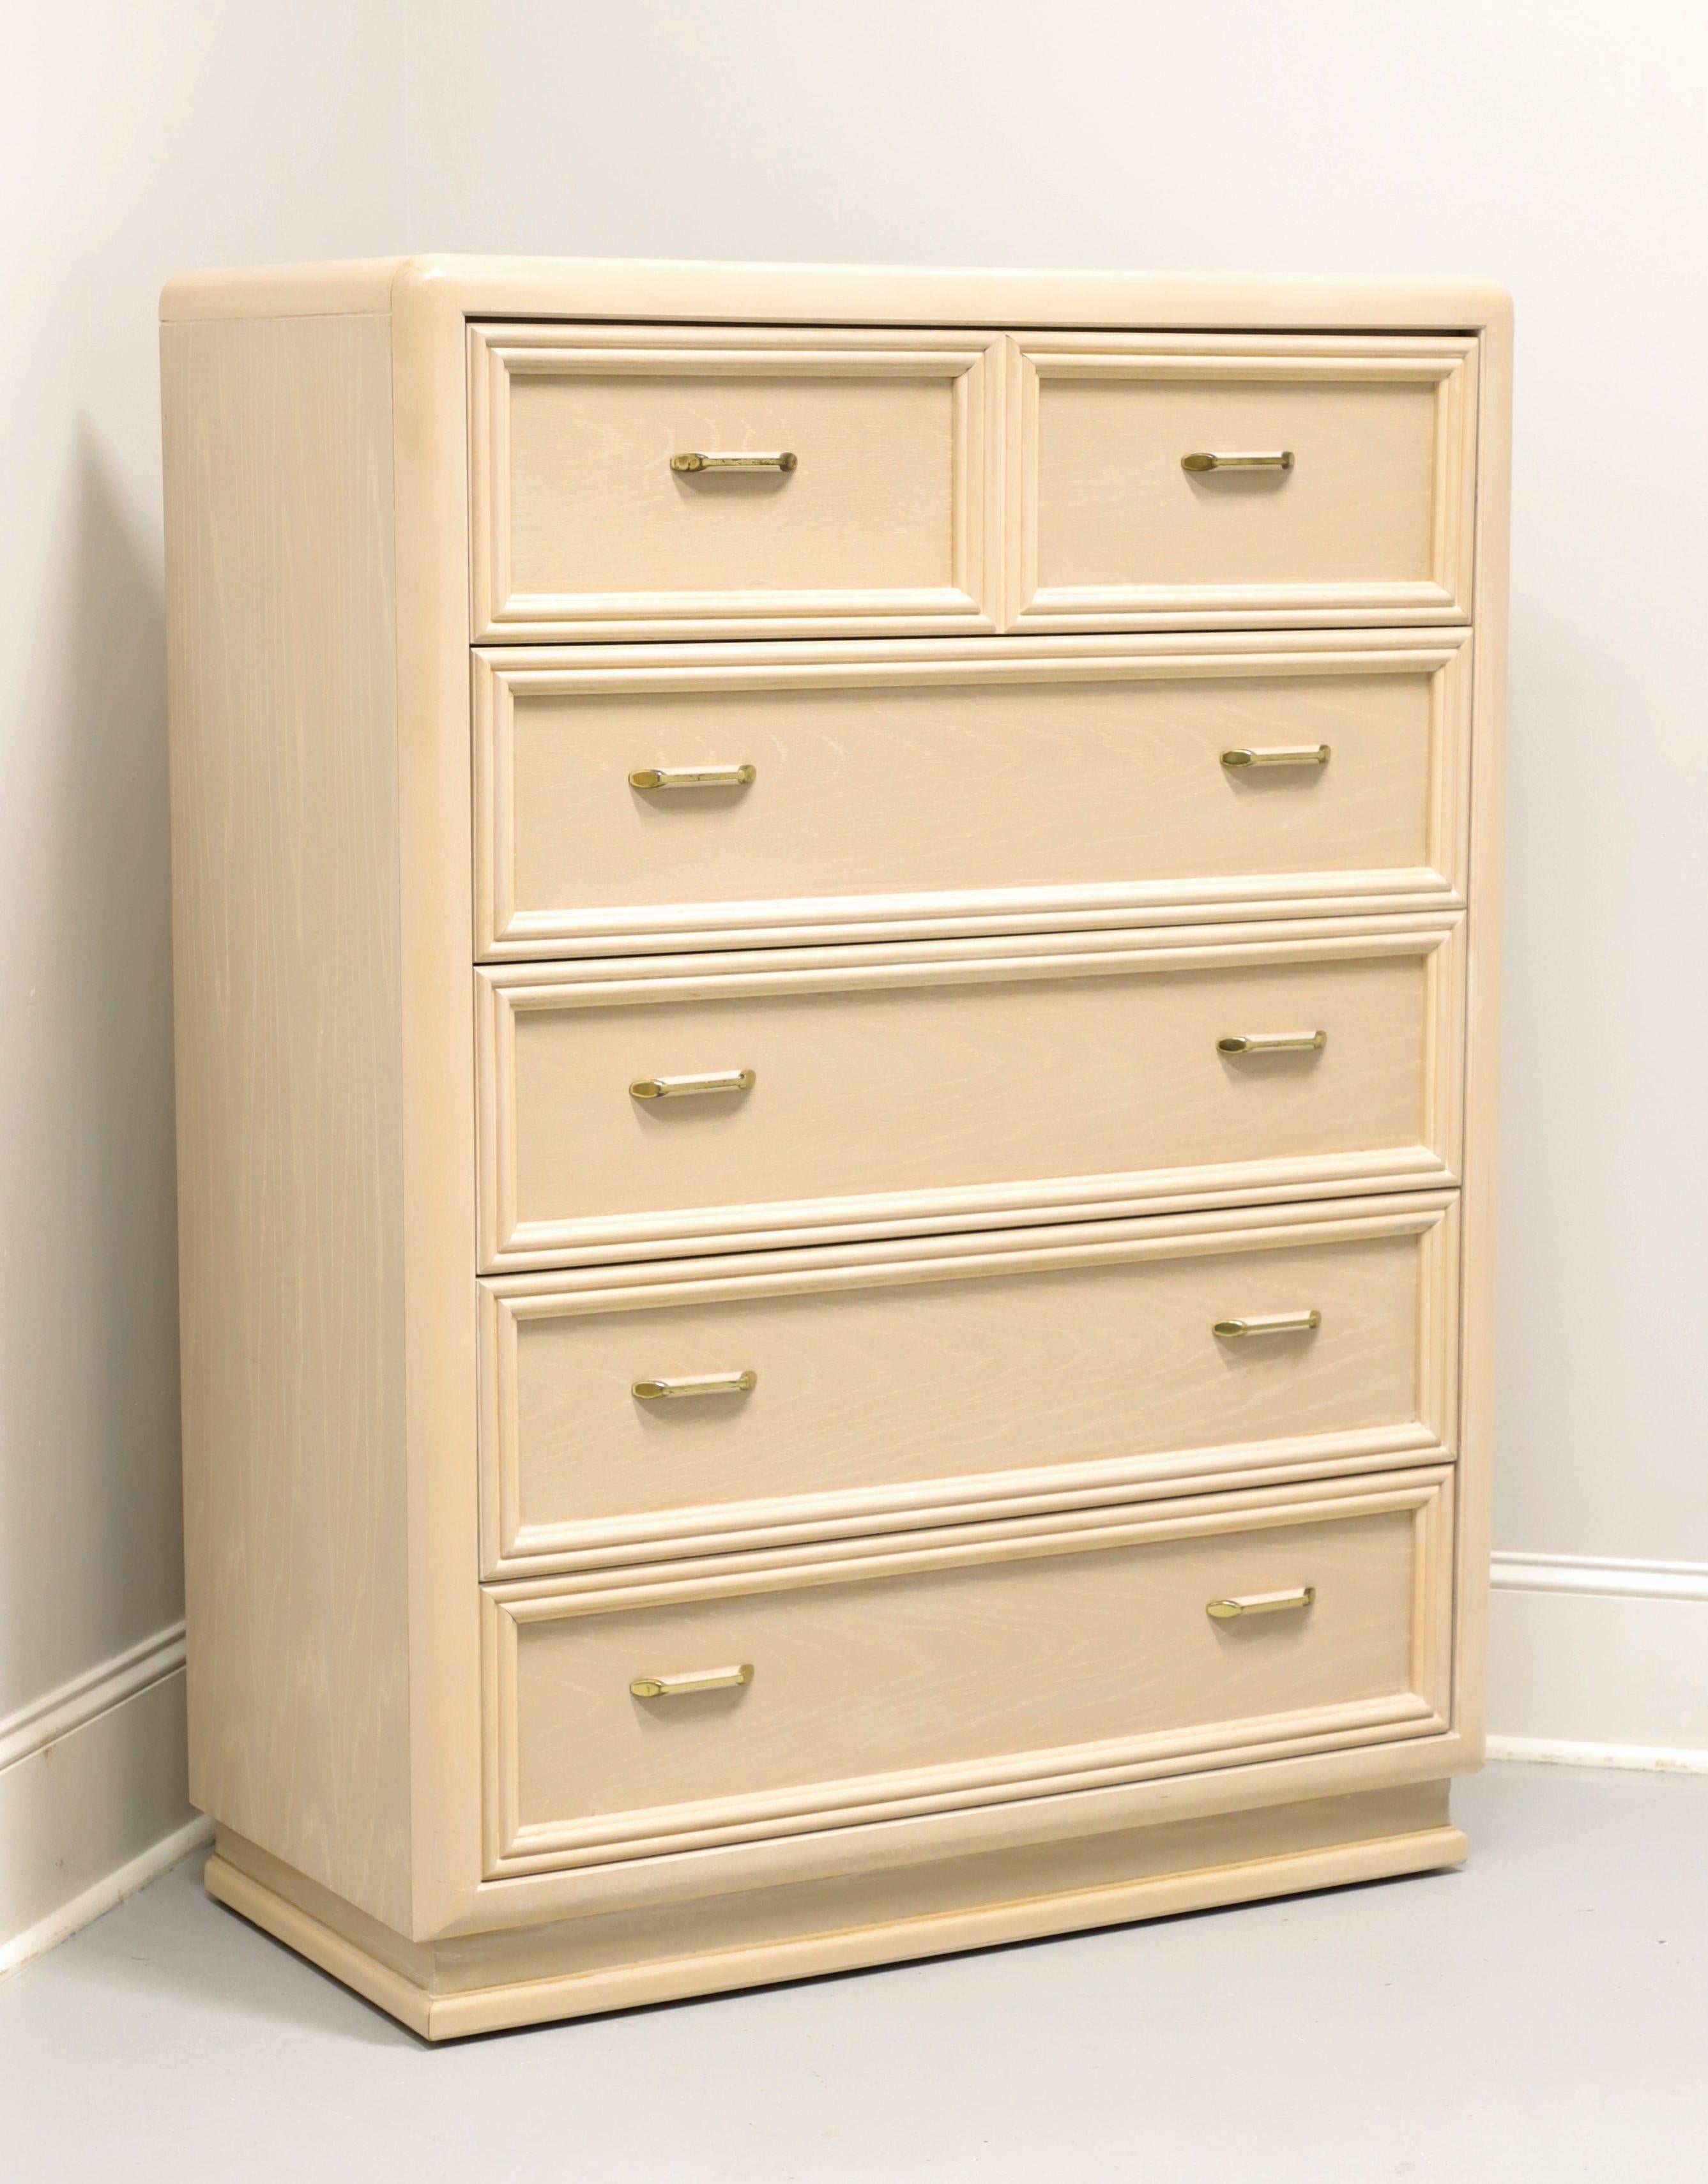 THOMASVILLE Whitewashed Oak Post-Modern Chest of Drawers with Waterfall Edges 4